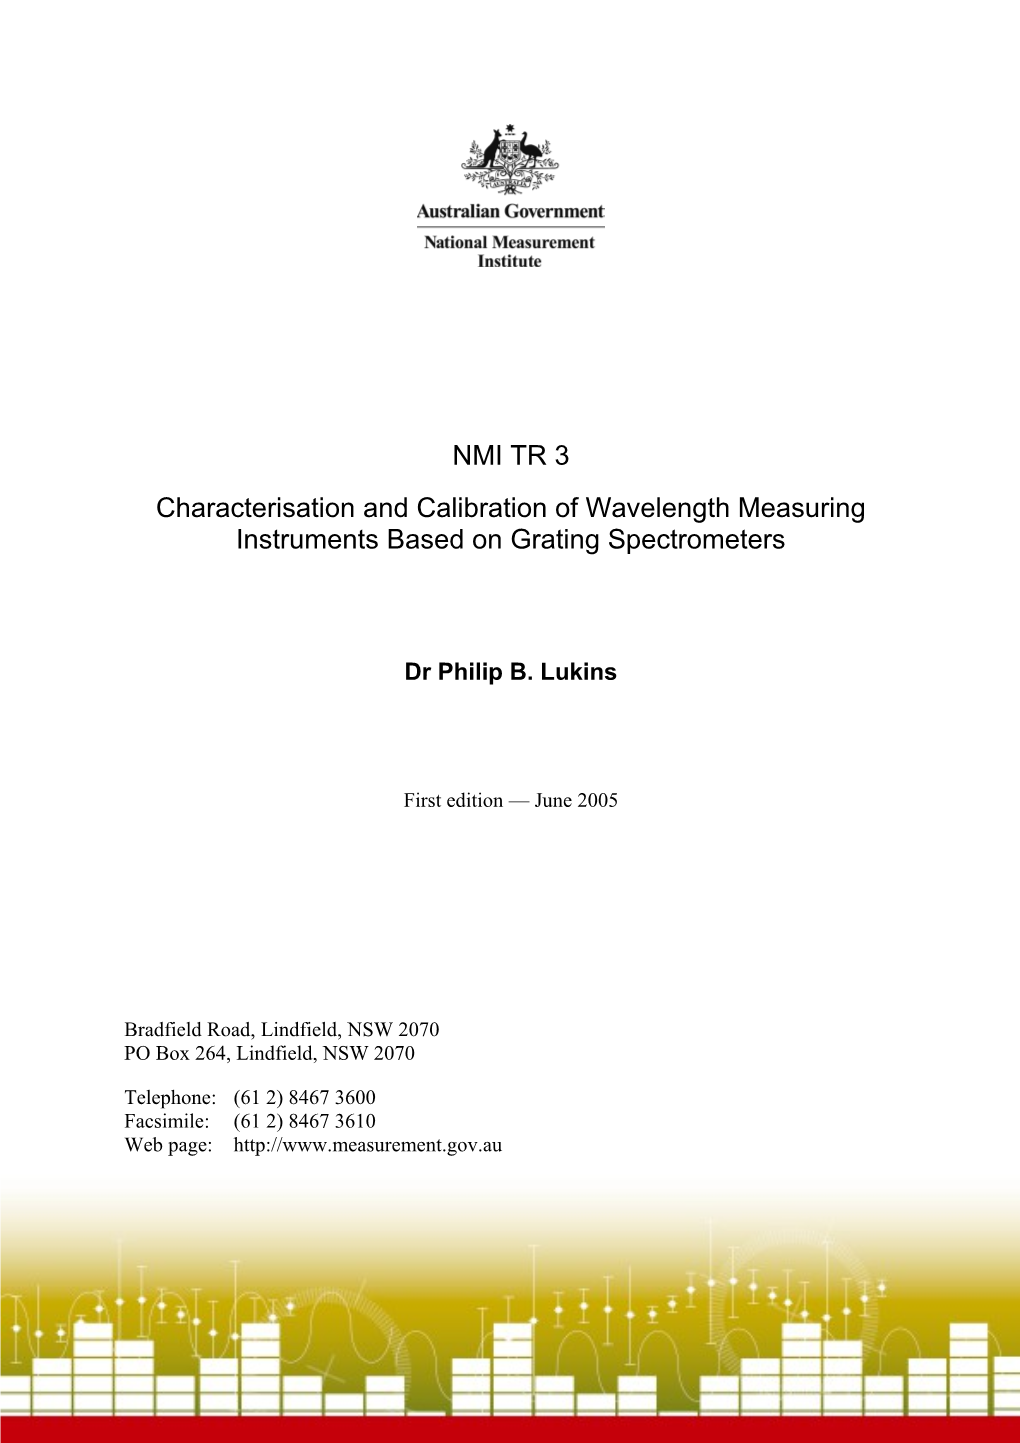 NMI TR 3 Characterisation and Calibration of Wavelength Measuring Instruments Based On